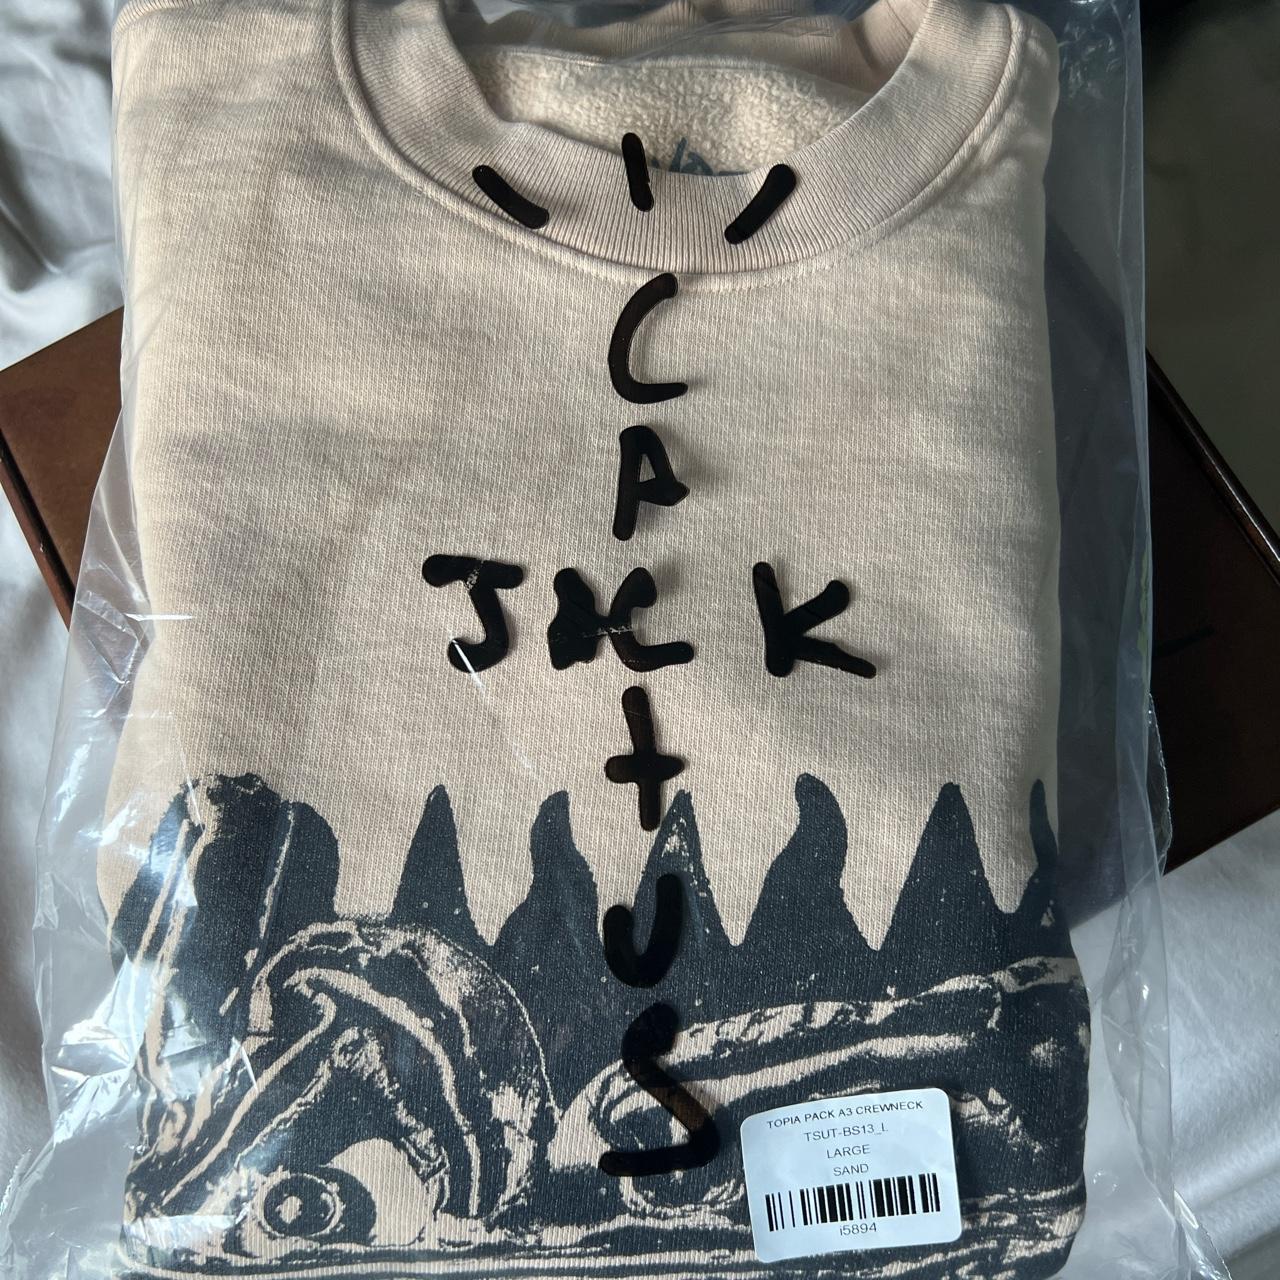 Travis Scott cactus jack backpack from the for ite - Depop